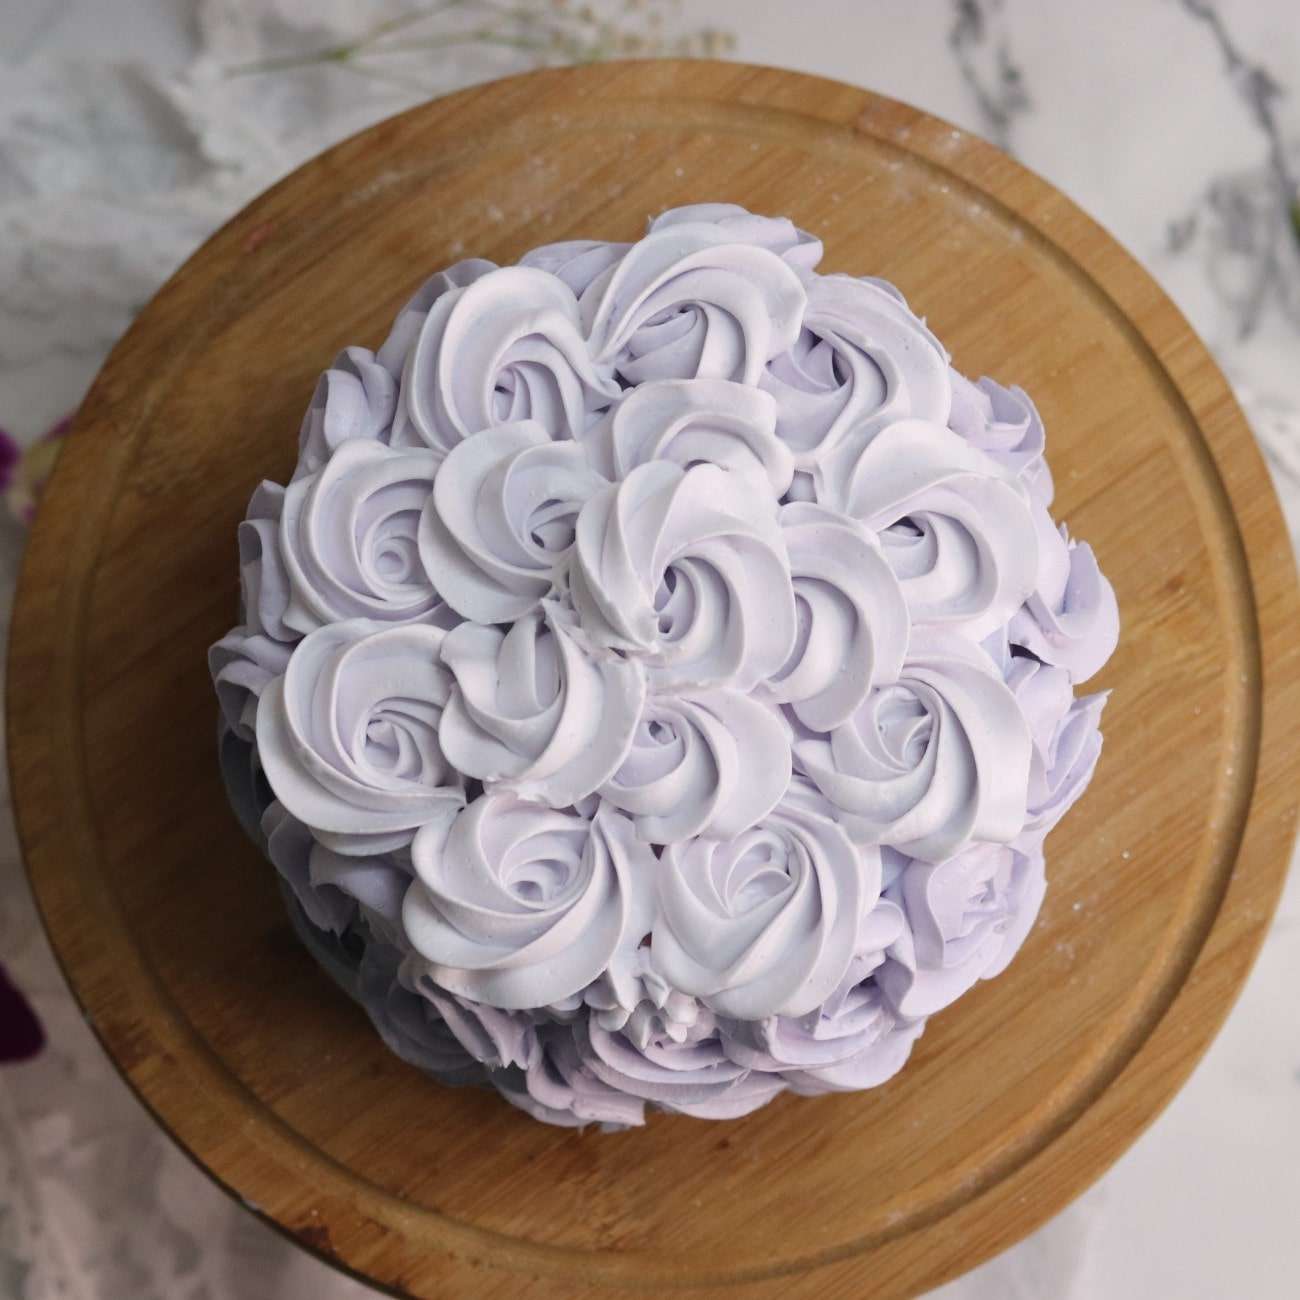 Lavender Cake with Vanilla Buttercream - Wow! Is that really edible? Custom  Cakes+ Cake Decorating Tutorials